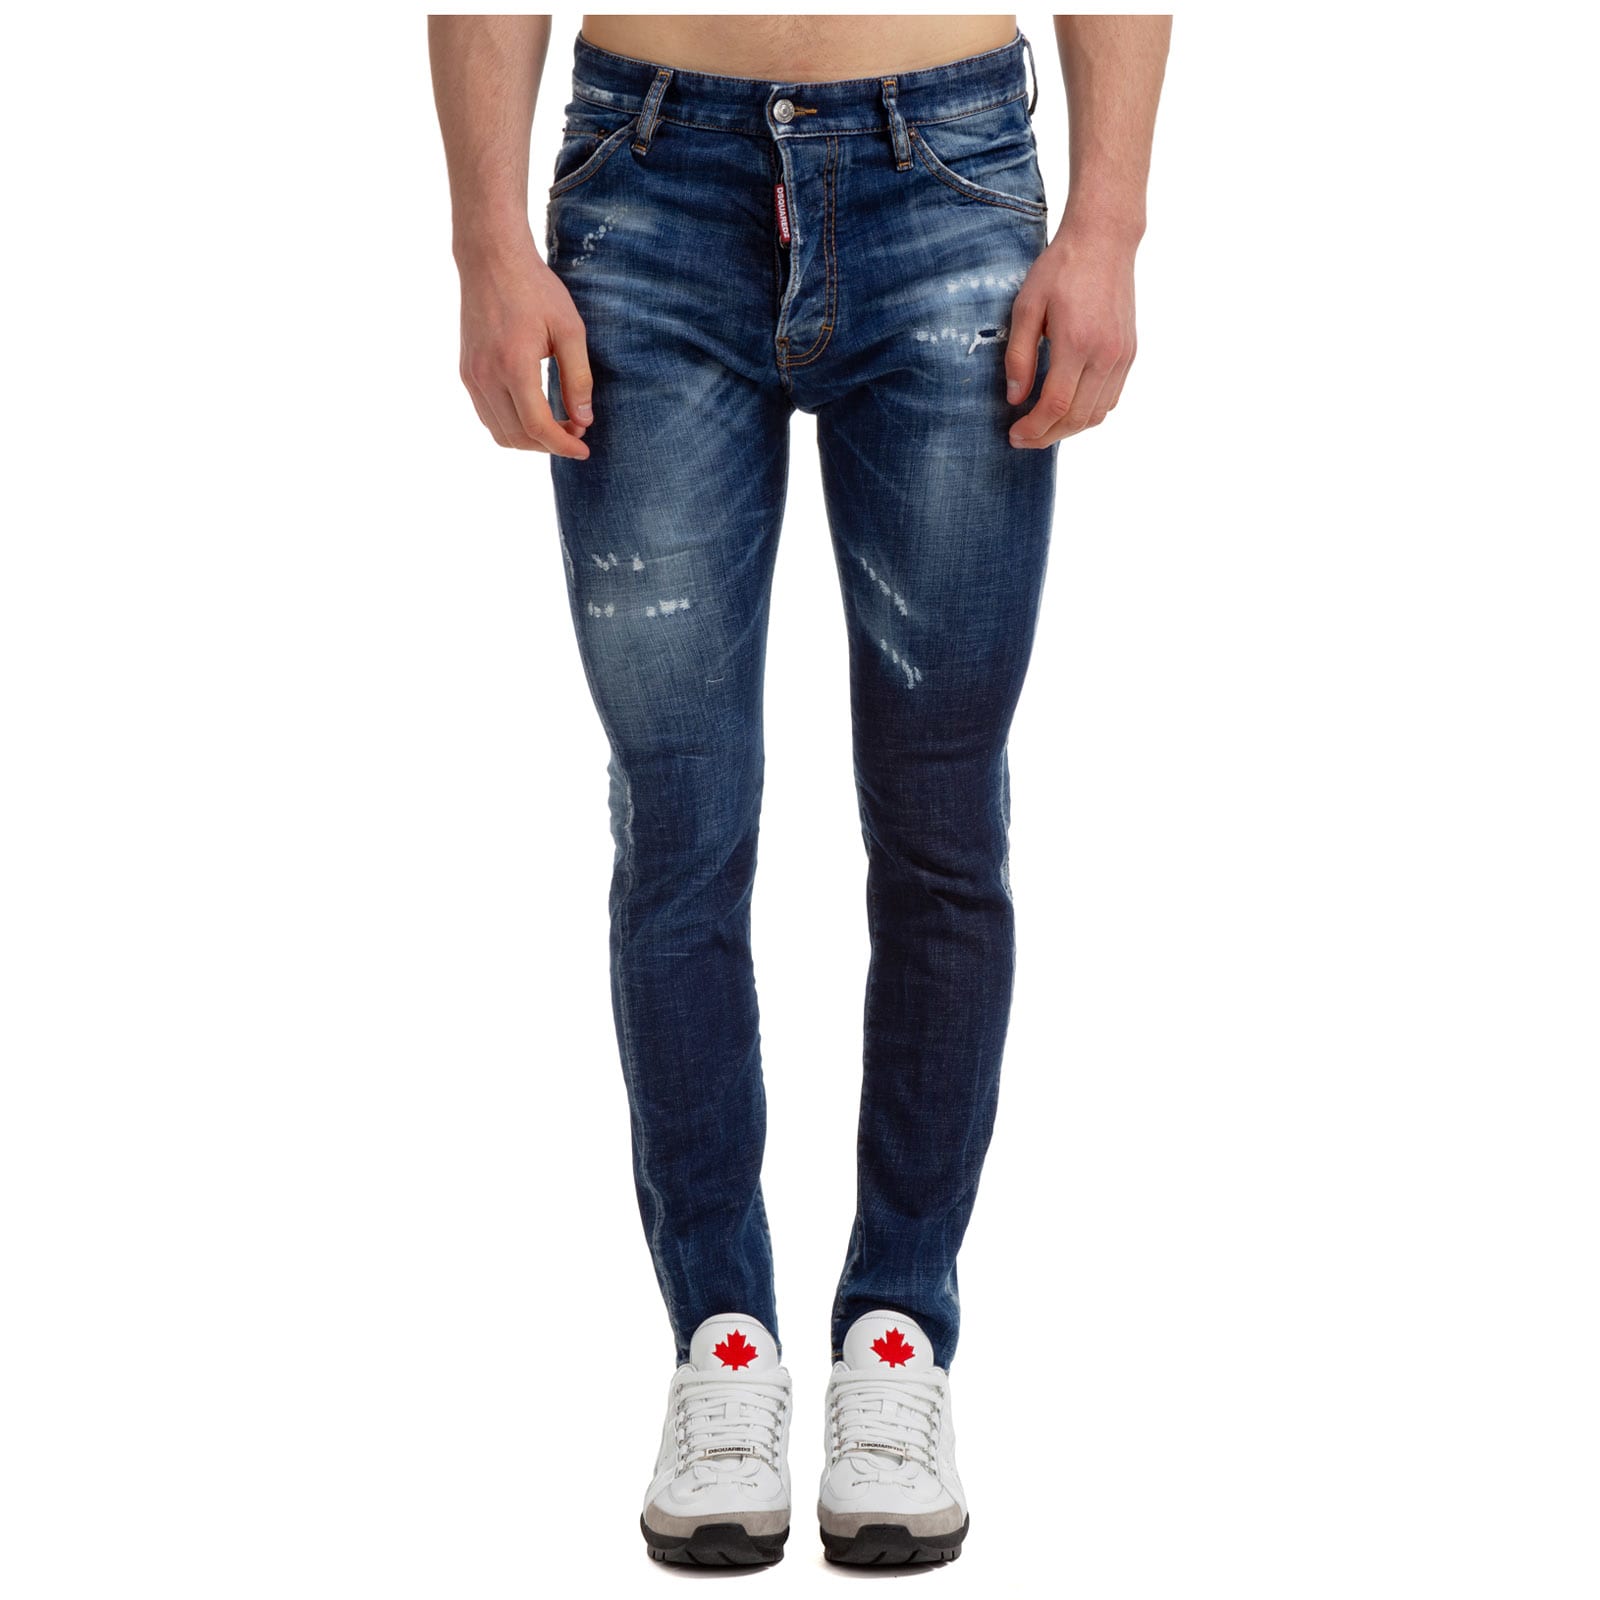 DSQUARED2 COOL GUY JEANS,S74LB0857S30342470